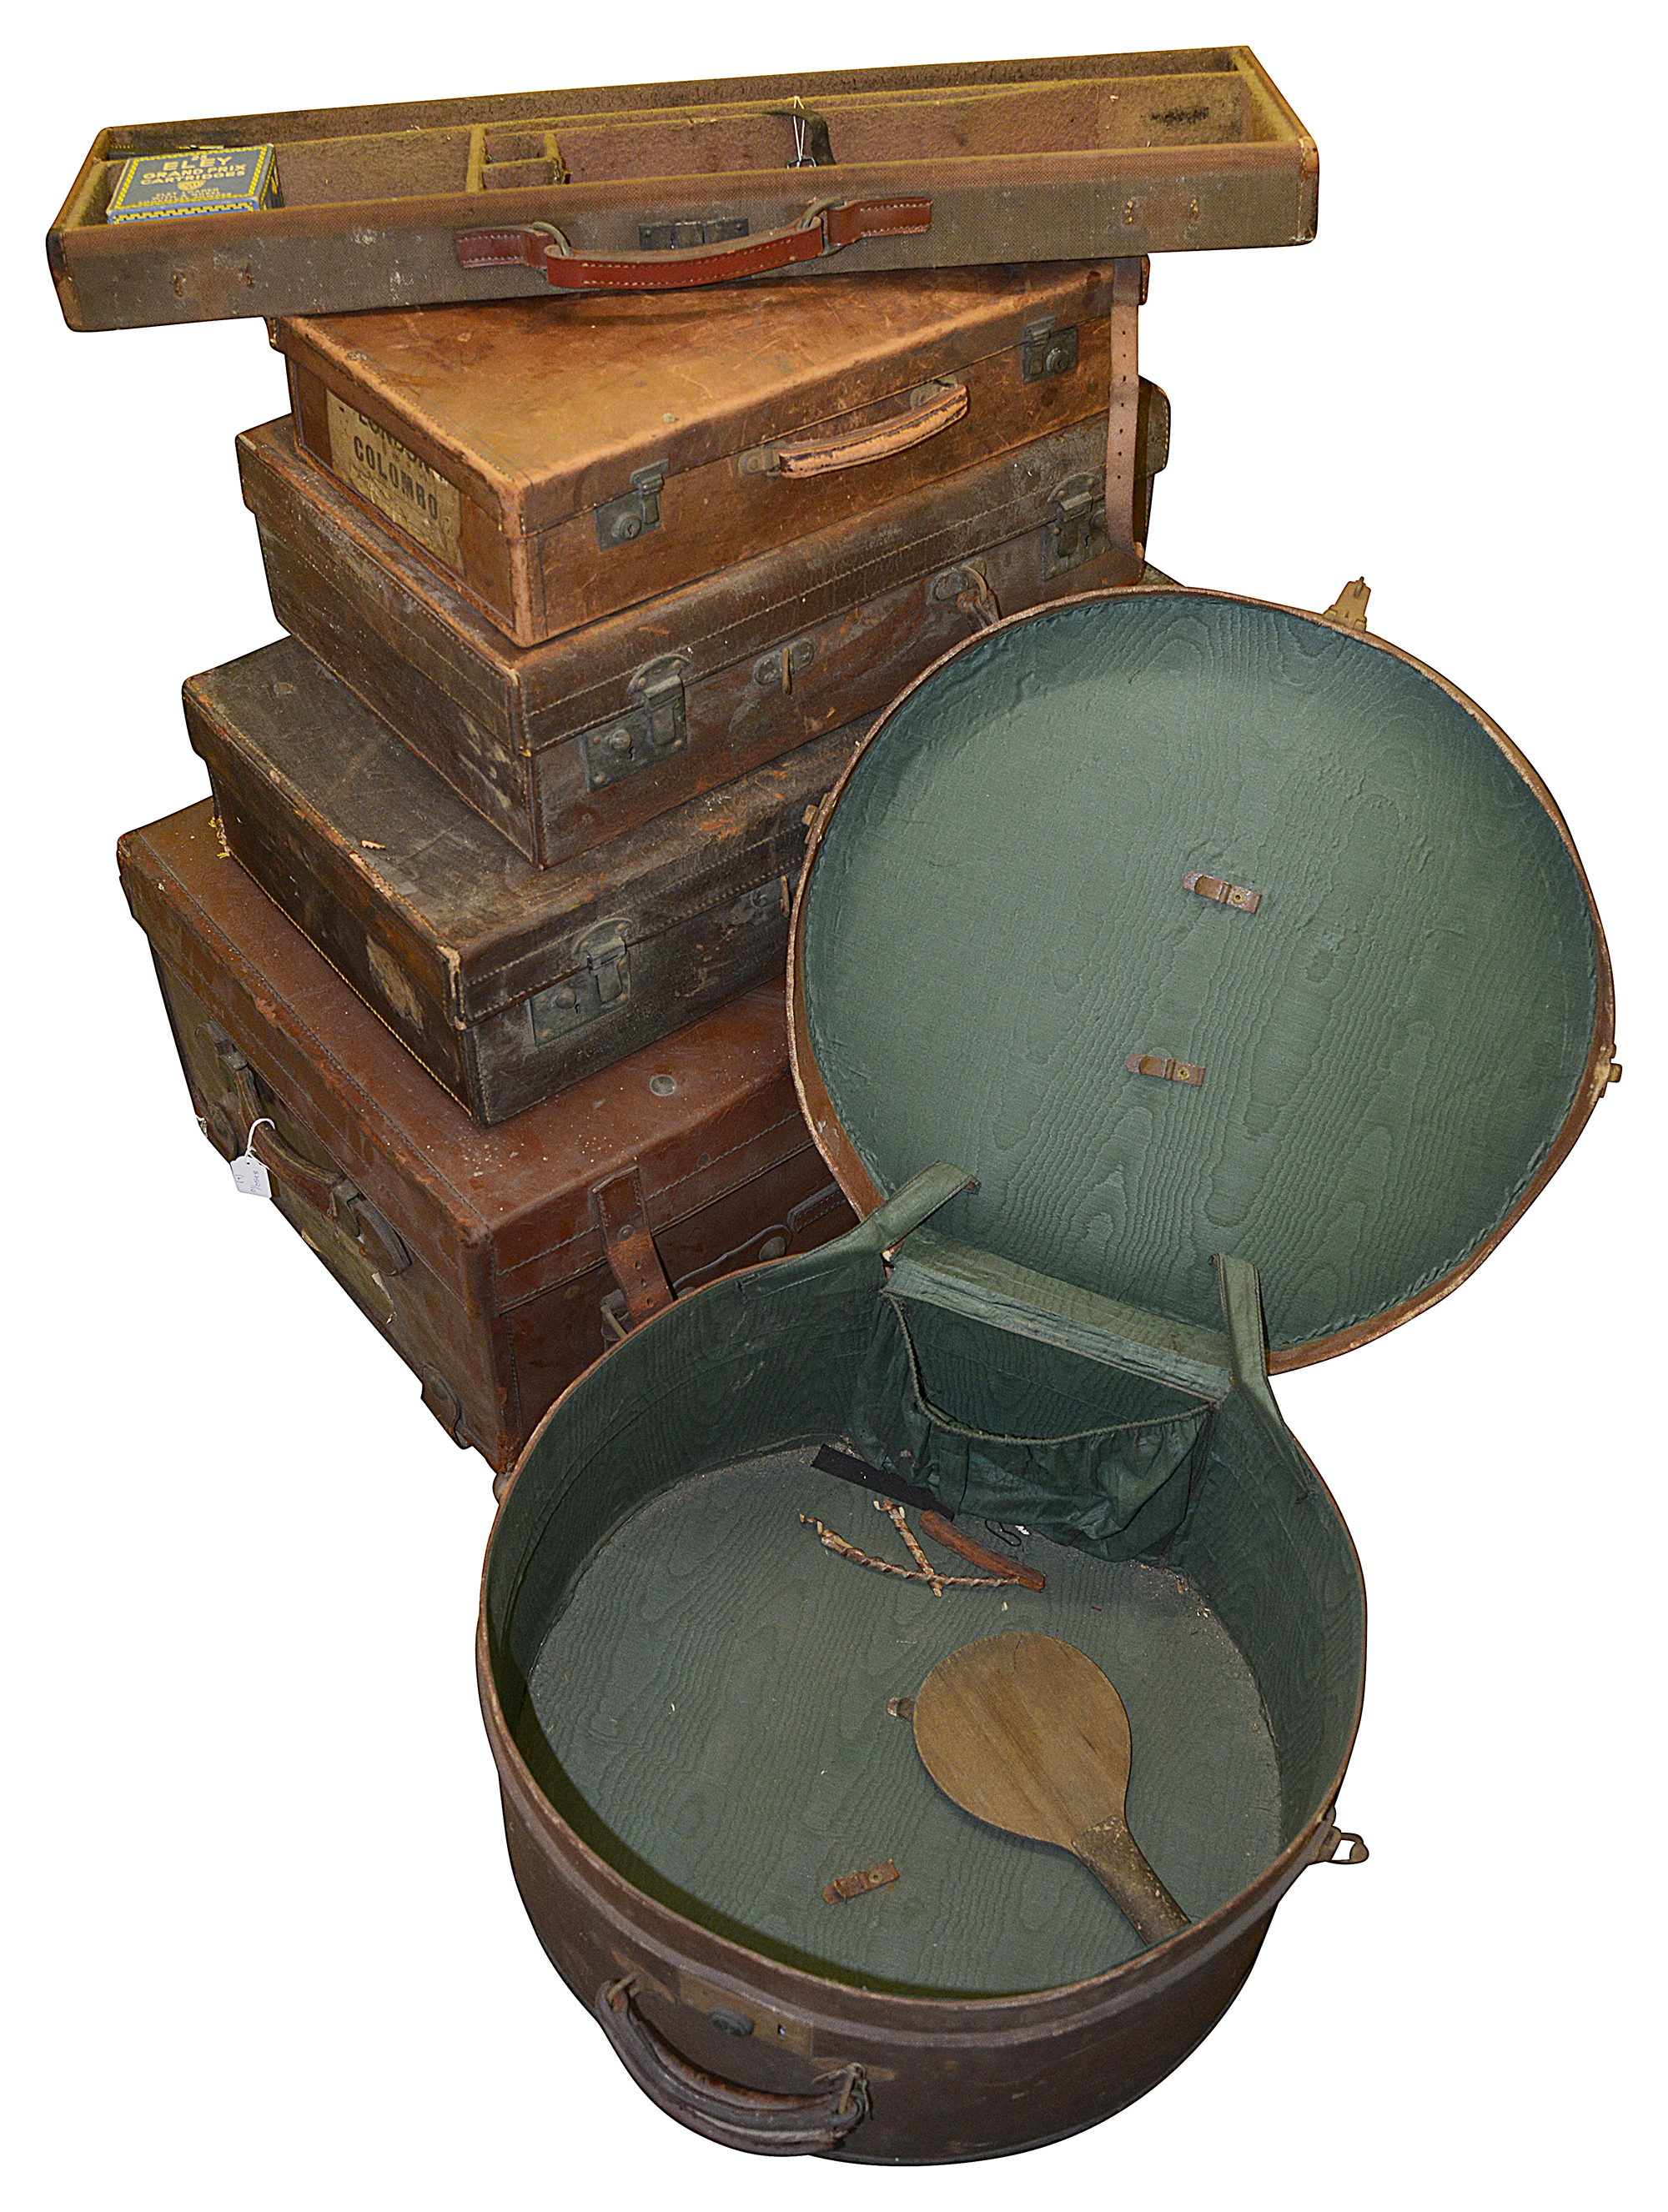 An early 20th century stitched tan leather trunk and other luggage and cases - Image 2 of 6